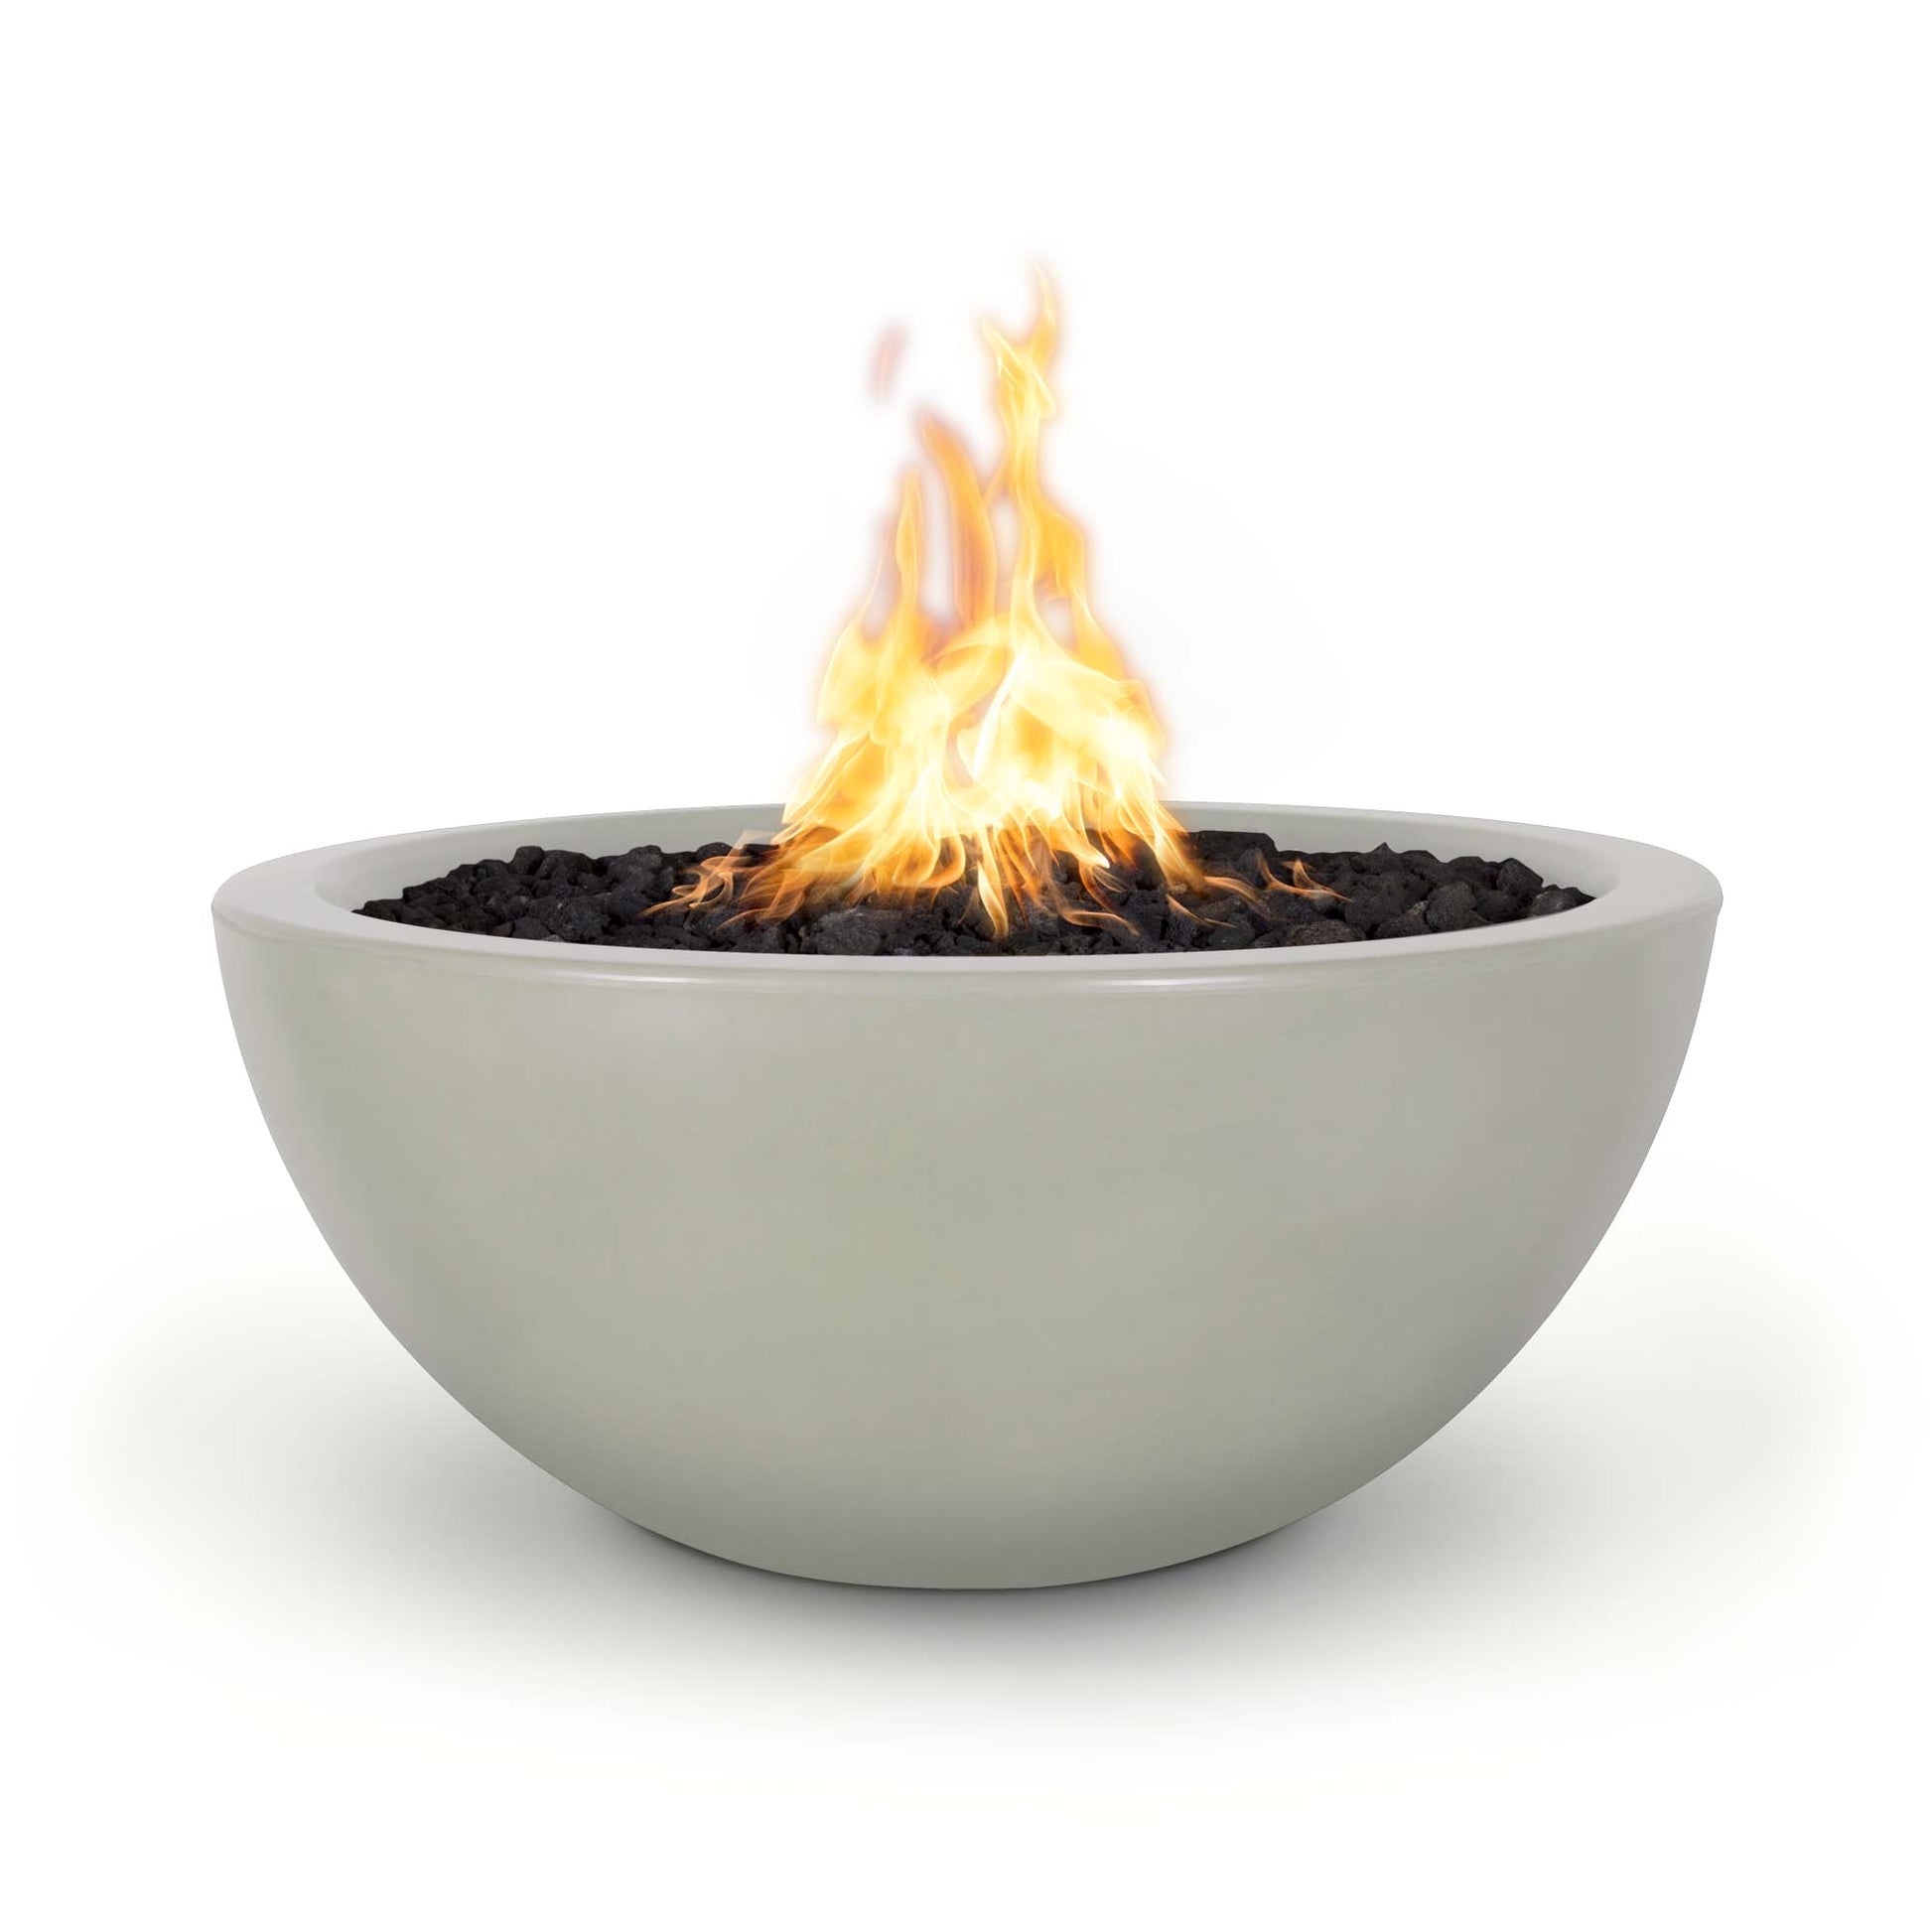 The Outdoor Plus Round Luna 38" Brown GFRC Concrete Liquid Propane Fire Bowl with Match Lit with Flame Sense Ignition